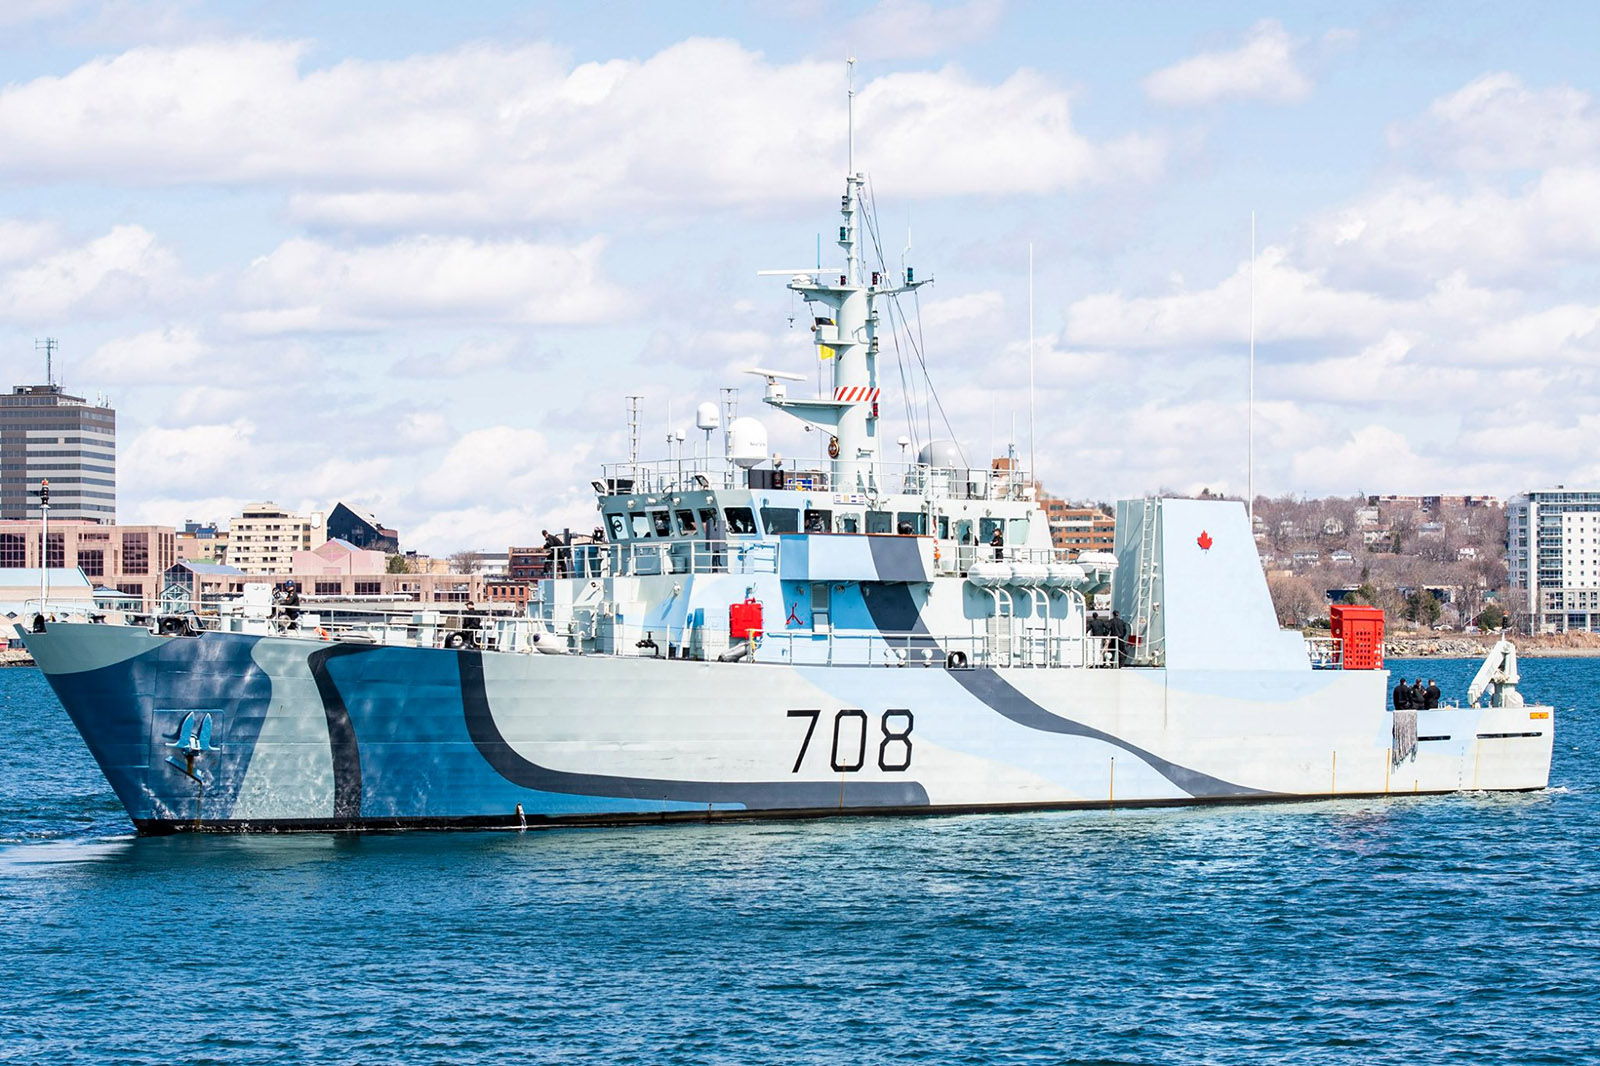 HMCS Moncton headed to sea to be prepared to support Op Laser. The ships will remain in Nova Scotian waters where our sailors stand ready to assist Canadians when called upon. 